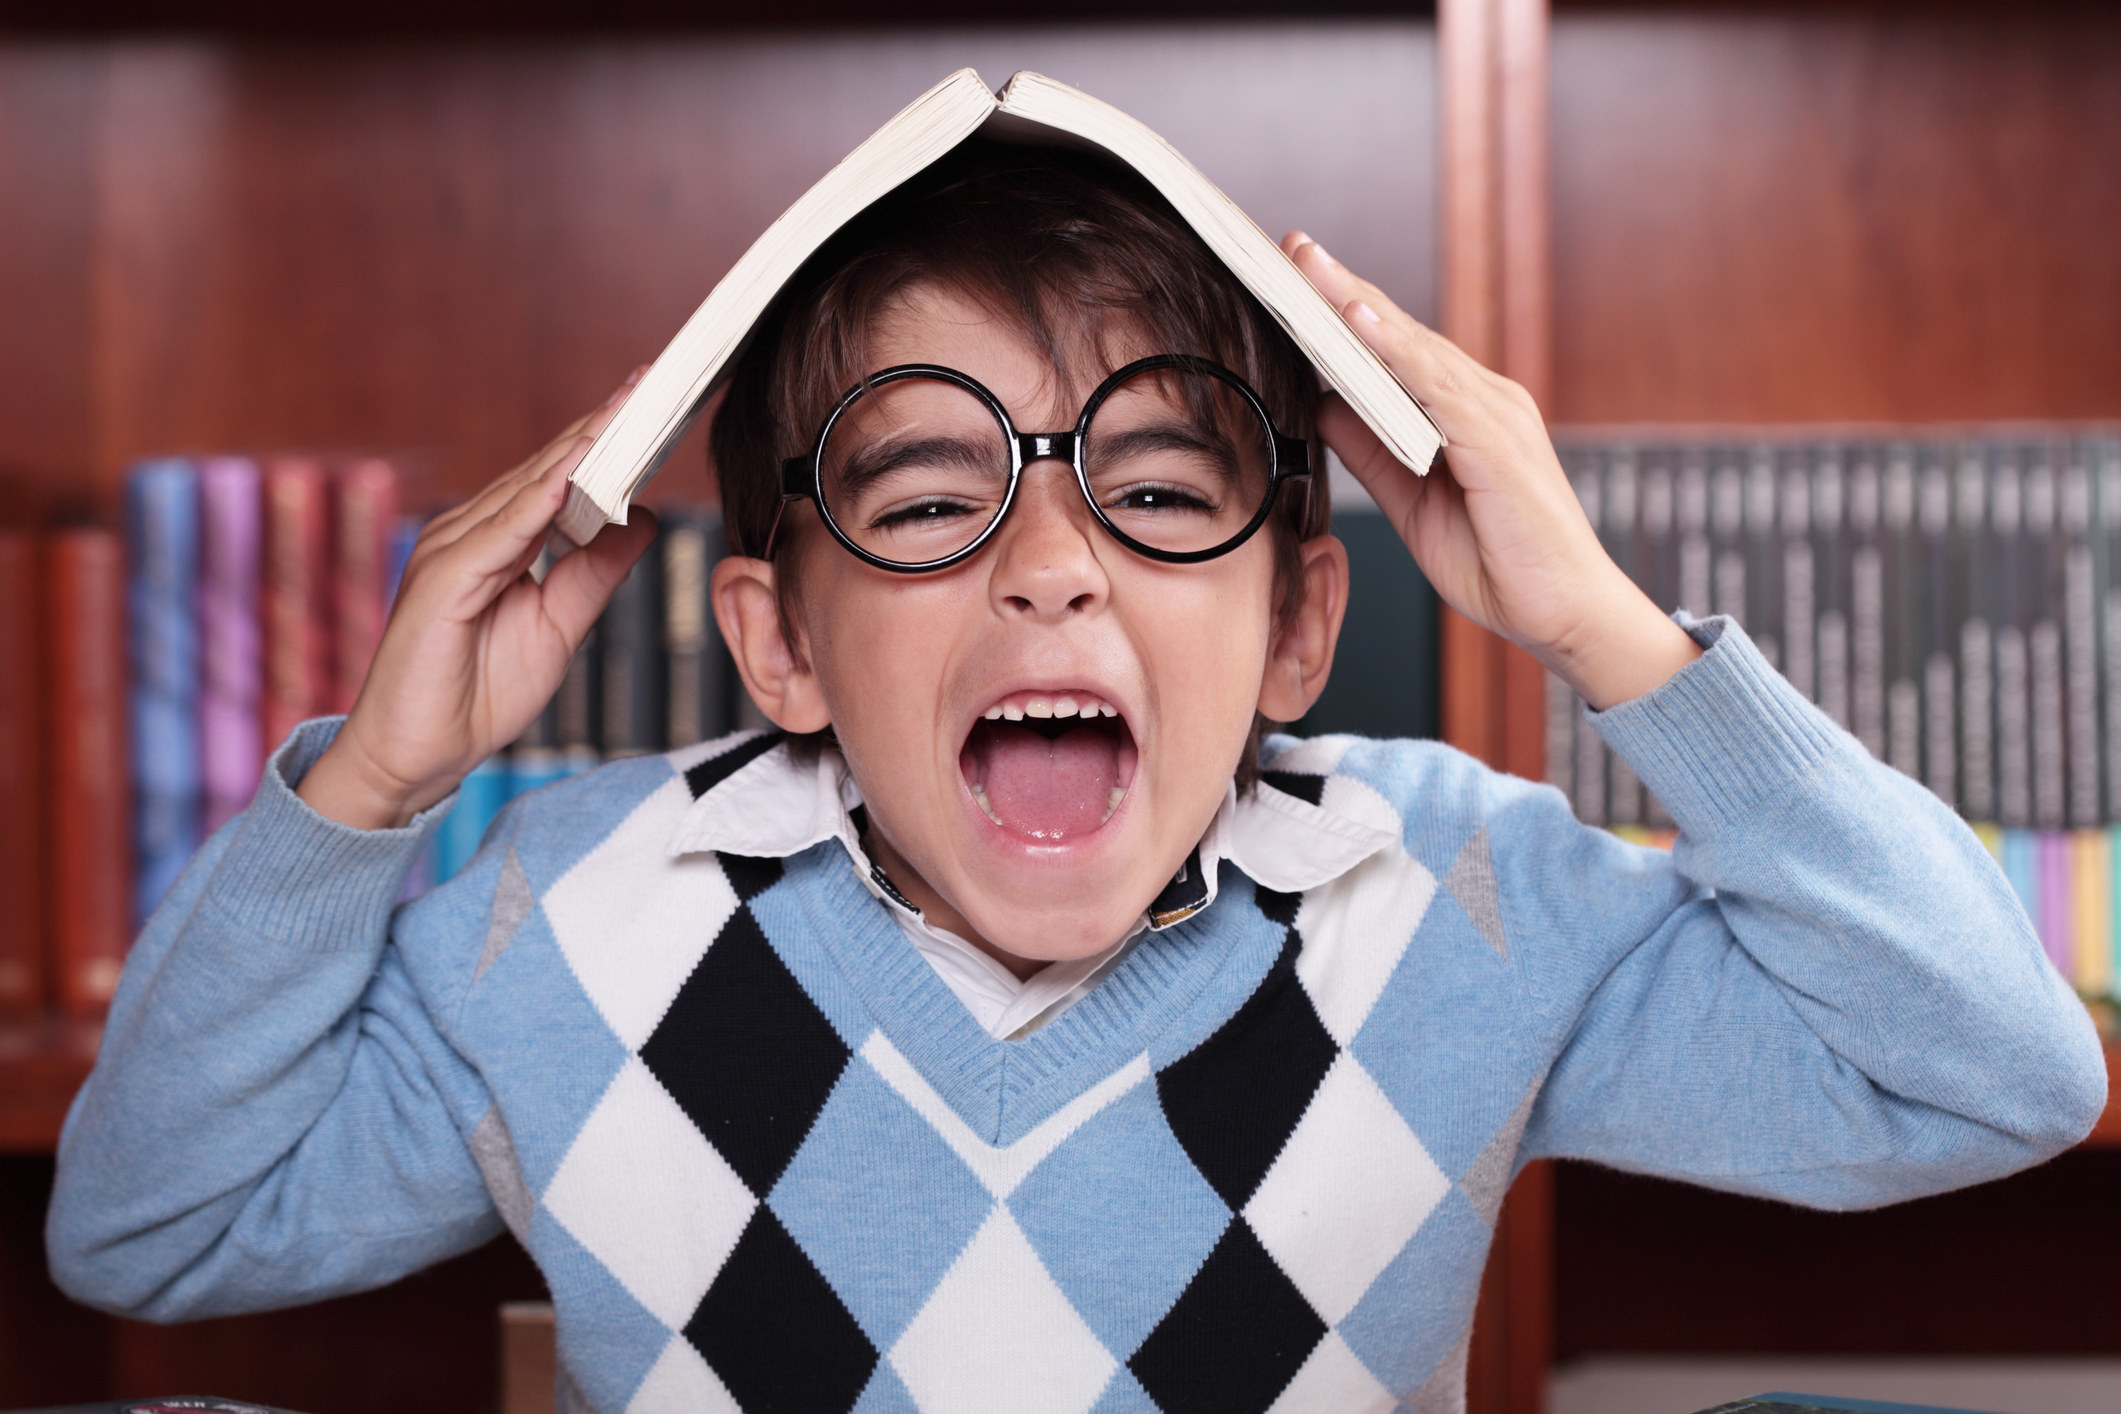 A young child screaming inside a library